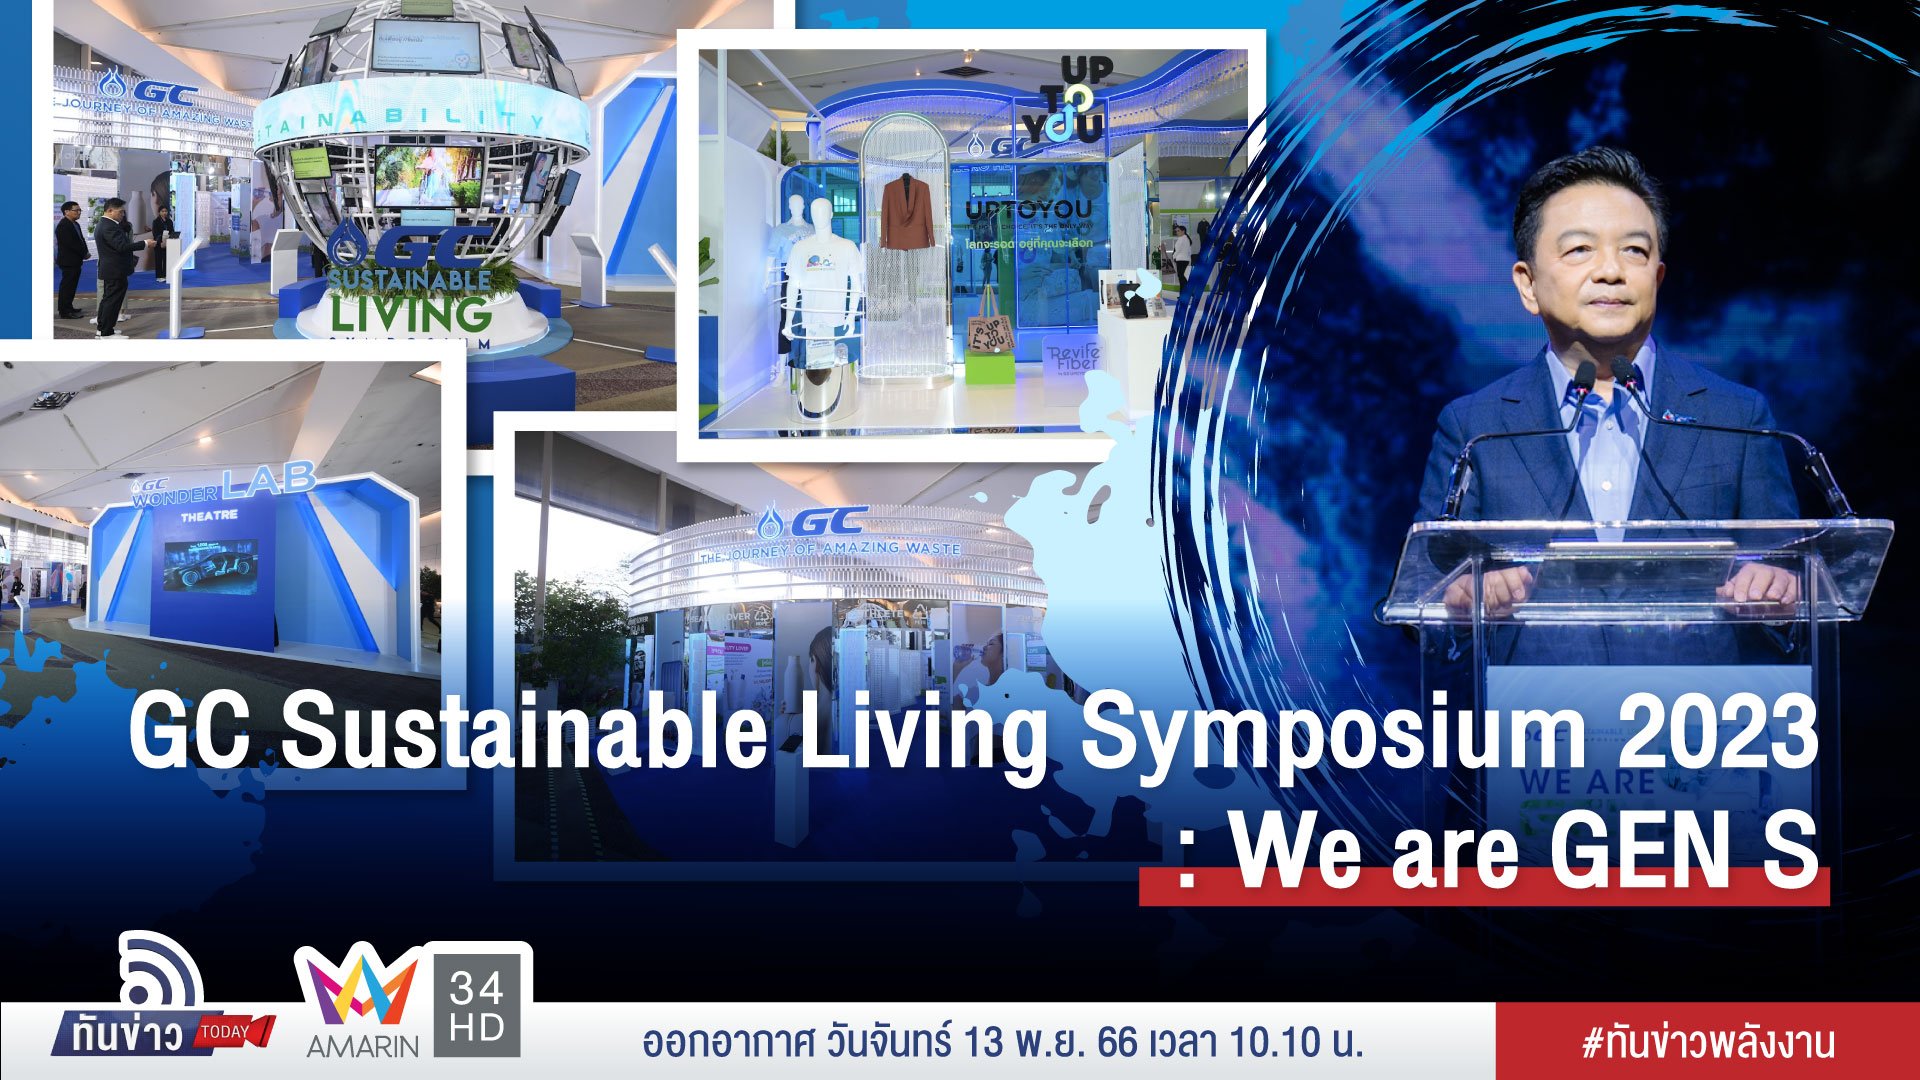 GC Sustainable Living Symposium 2023 : We are GEN S